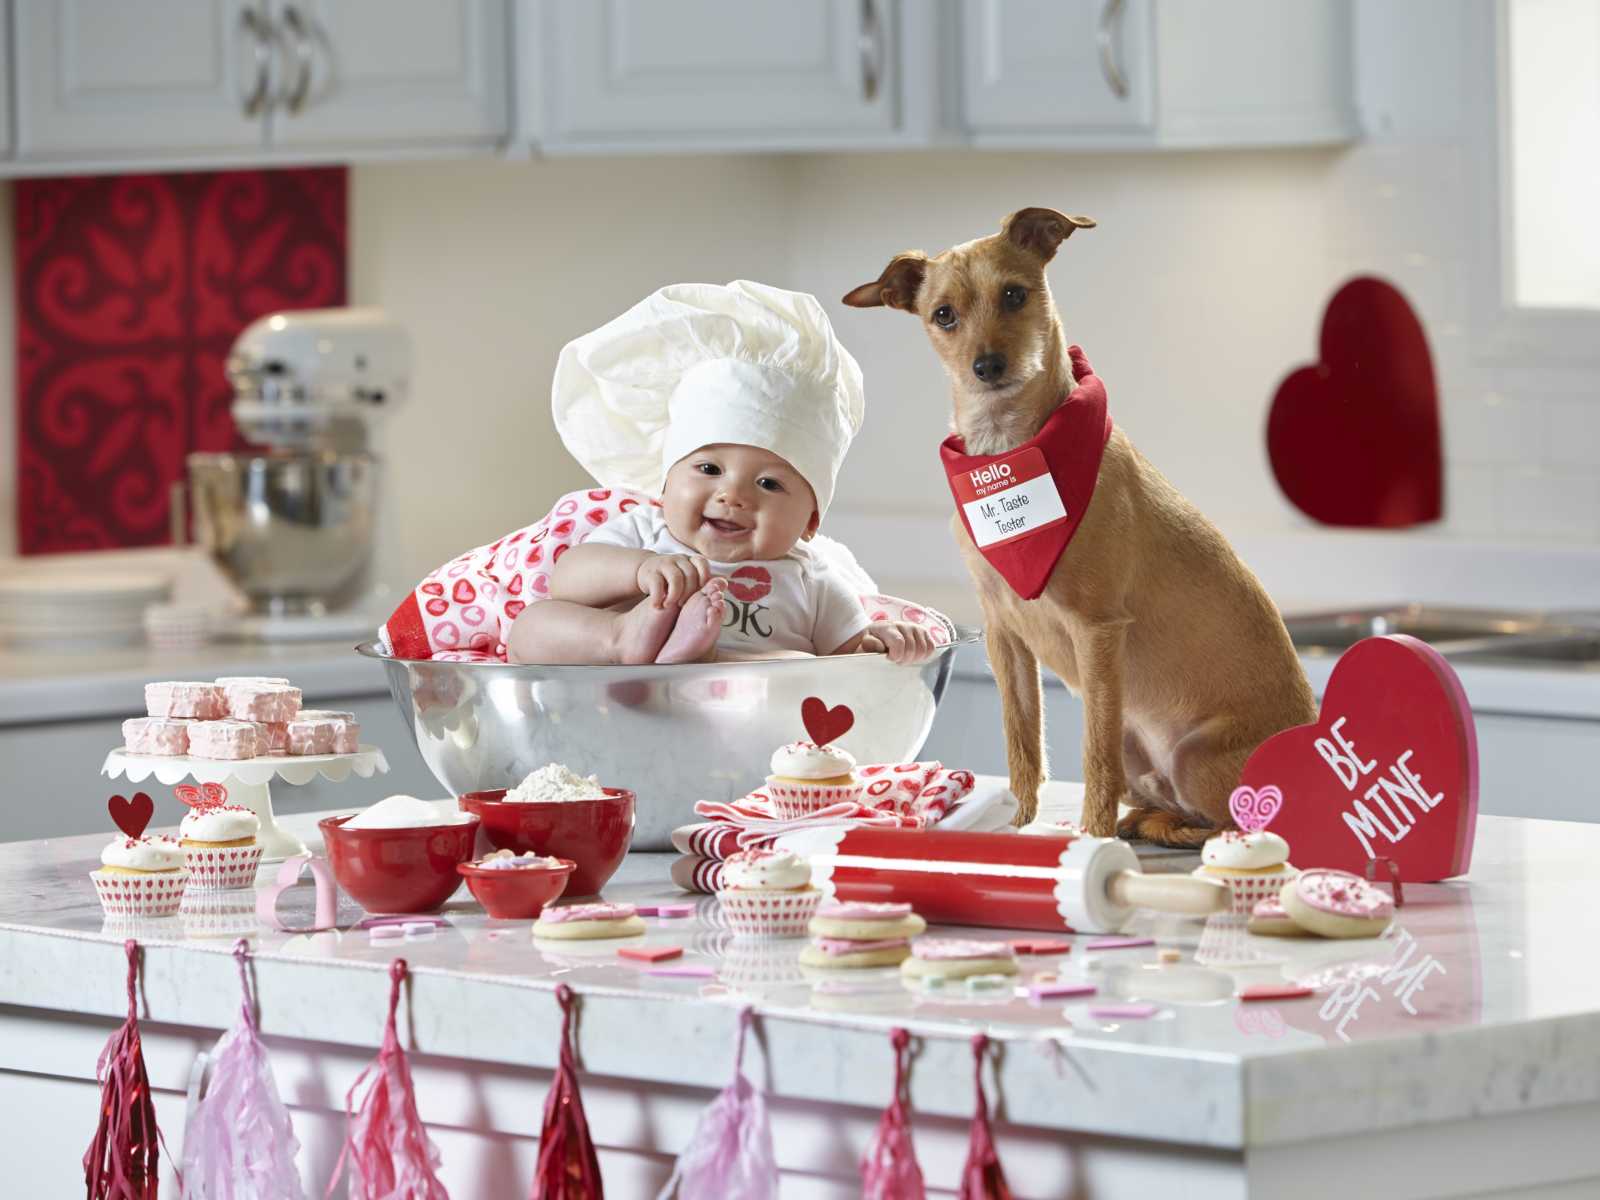 dog with red bandana sitting on kitchen counter with valentines decorations next to baby in mixing bowl with chefs hat on 